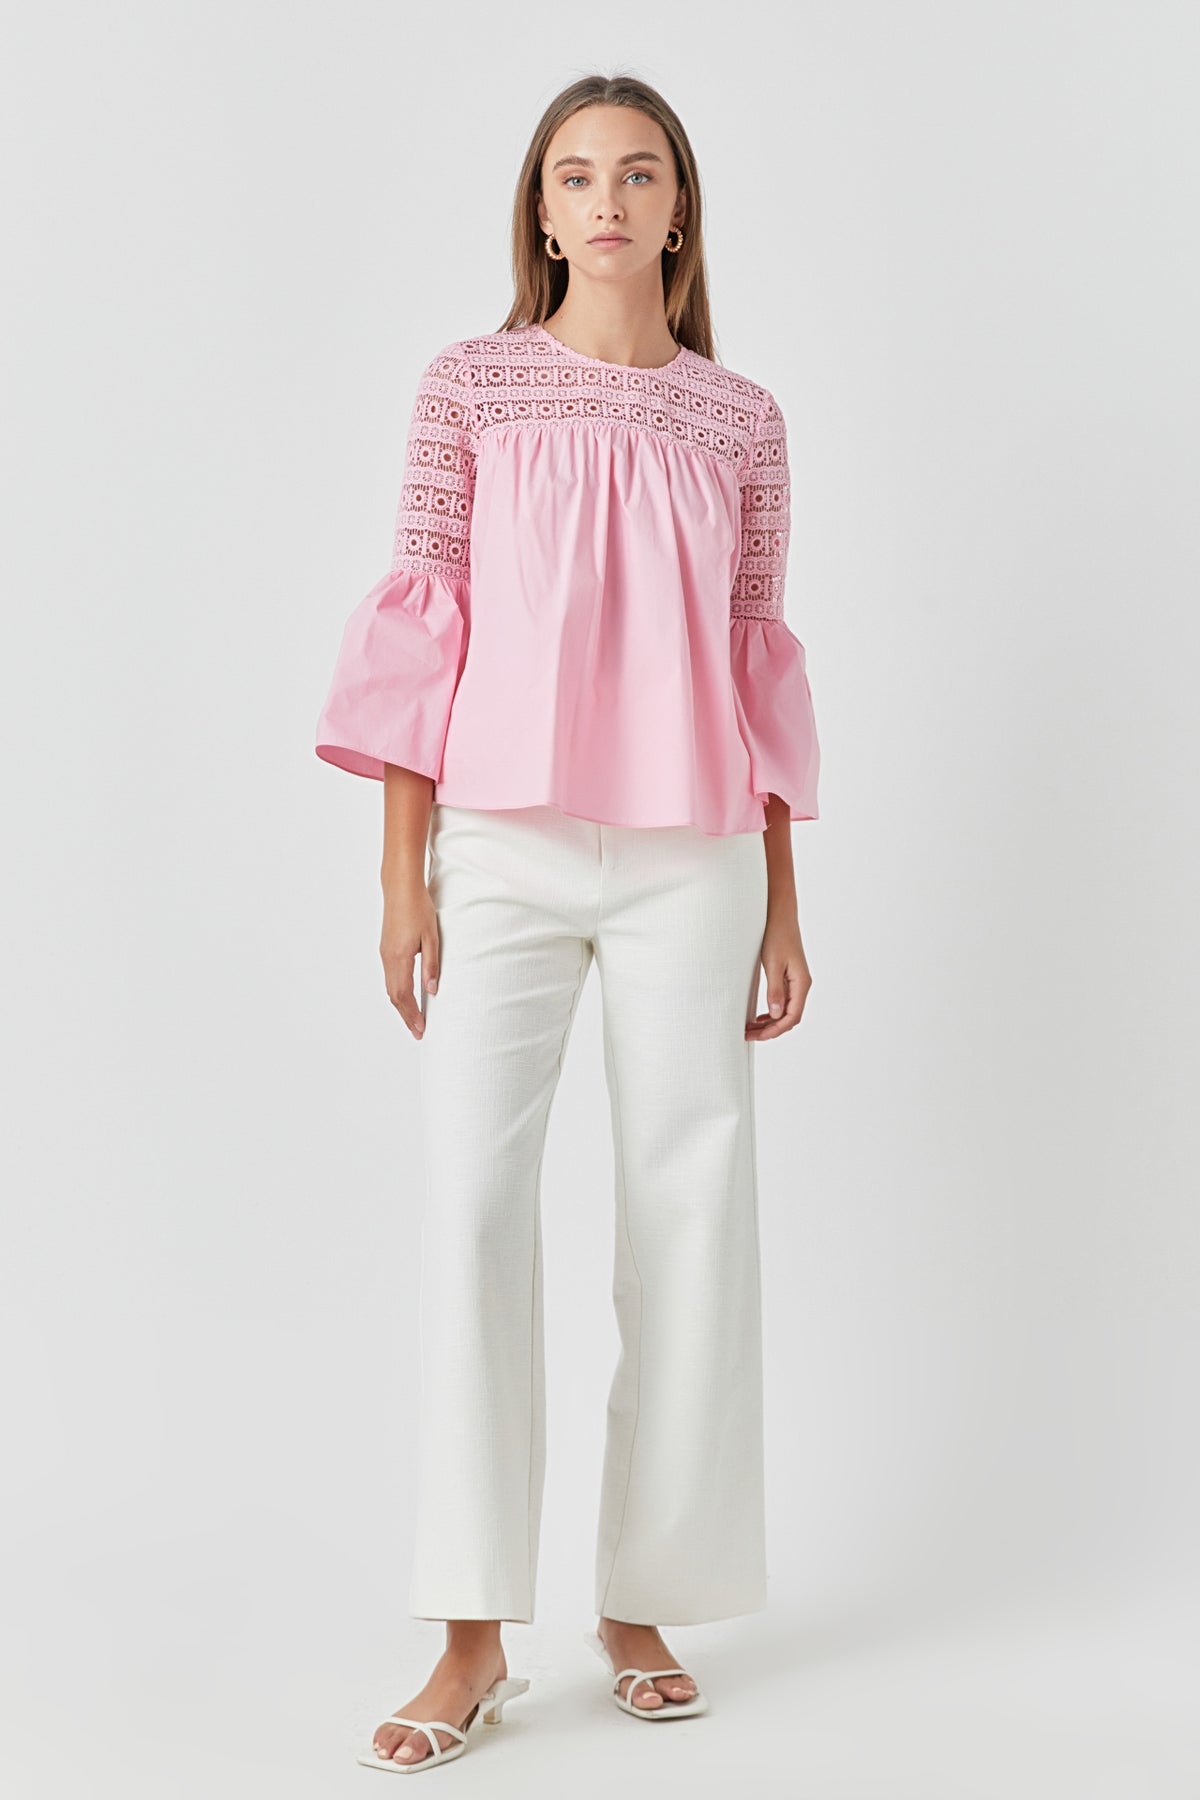 ENDLESS ROSE - Lace with Poplin Bell Sleeve Blouse - TOPS available at Objectrare